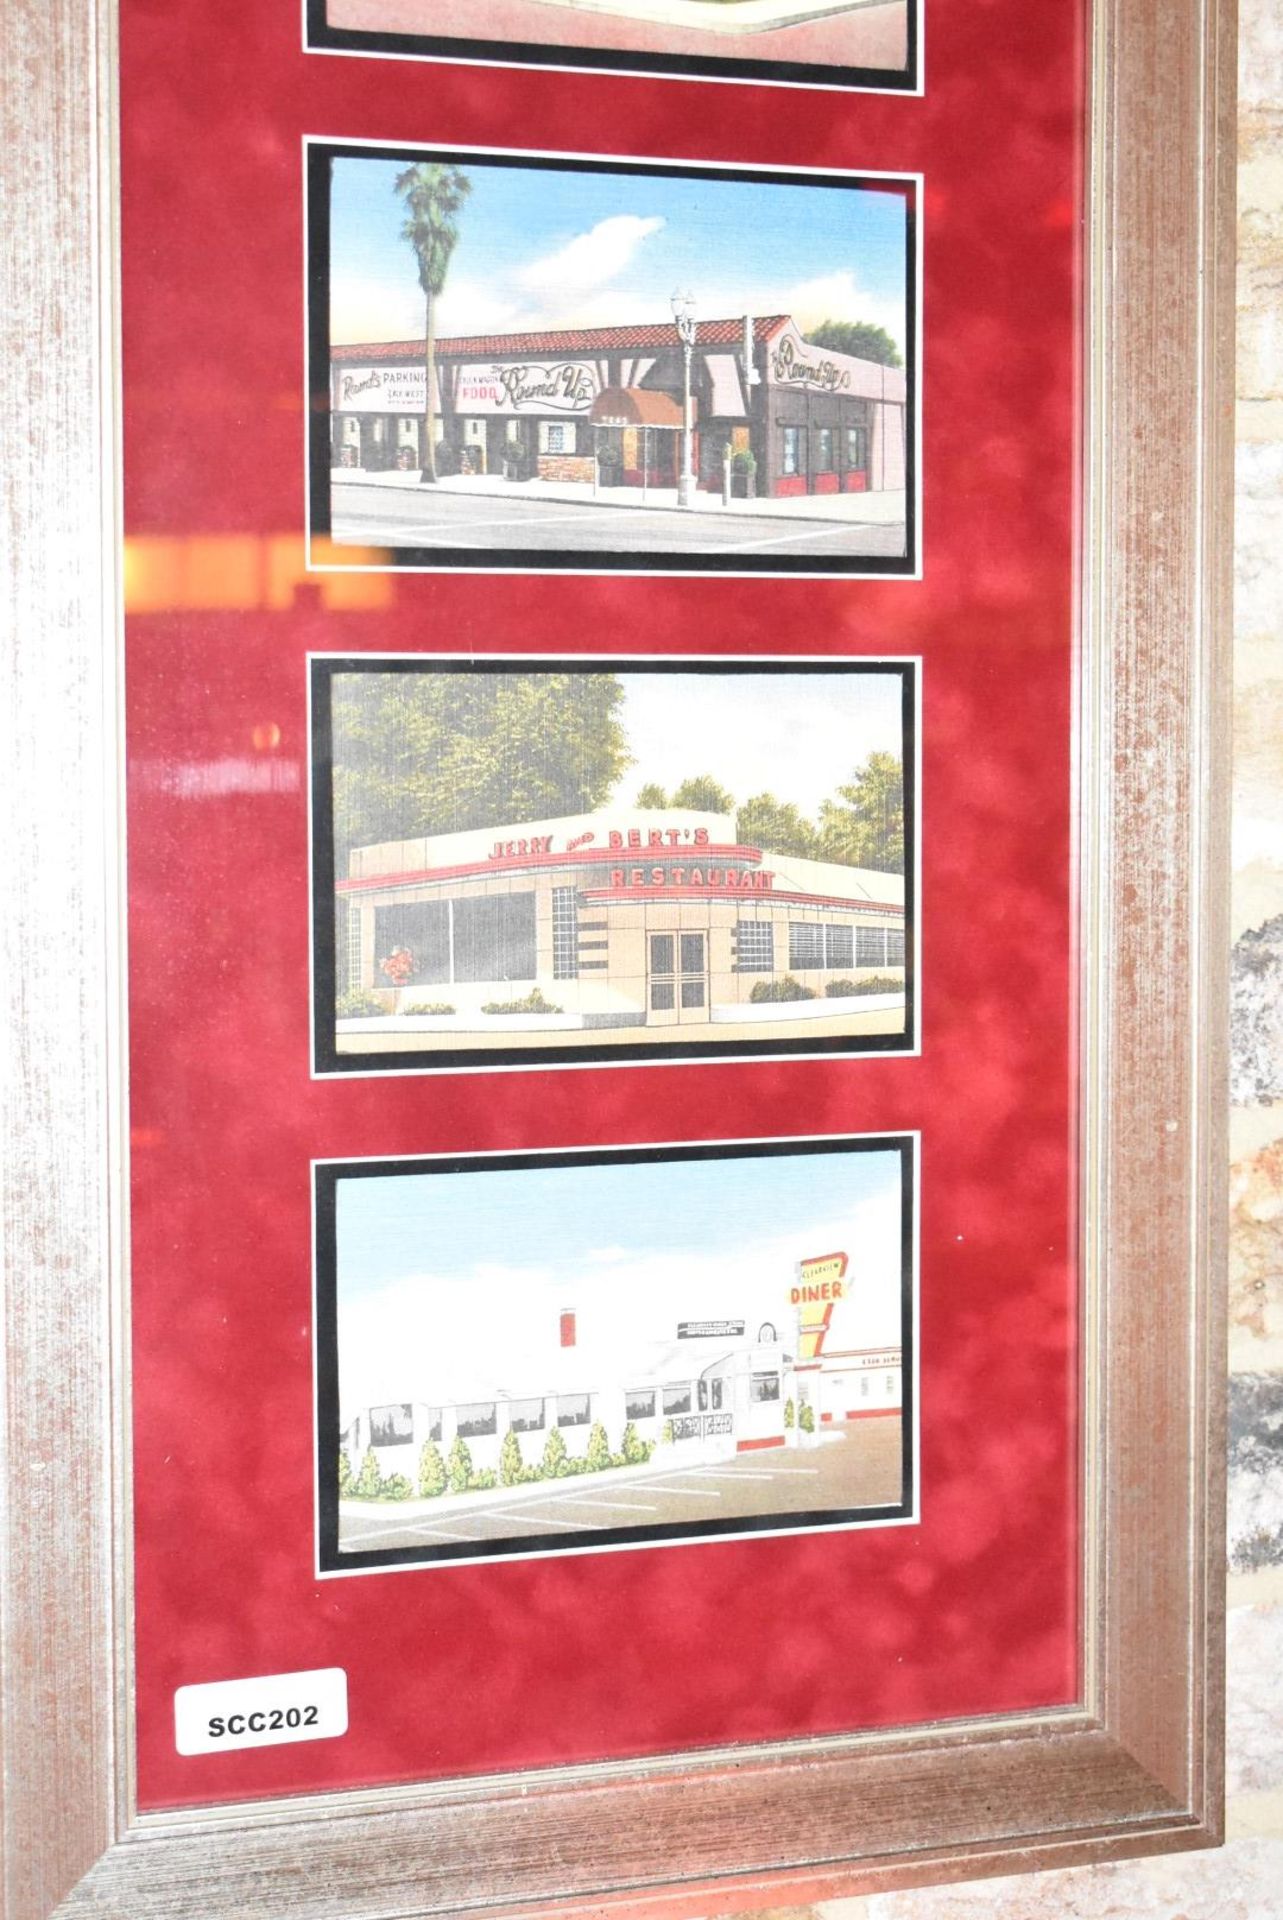 1 x Framed Wall Picture Featuring Images of American Diners / Restaurants - Image 4 of 4